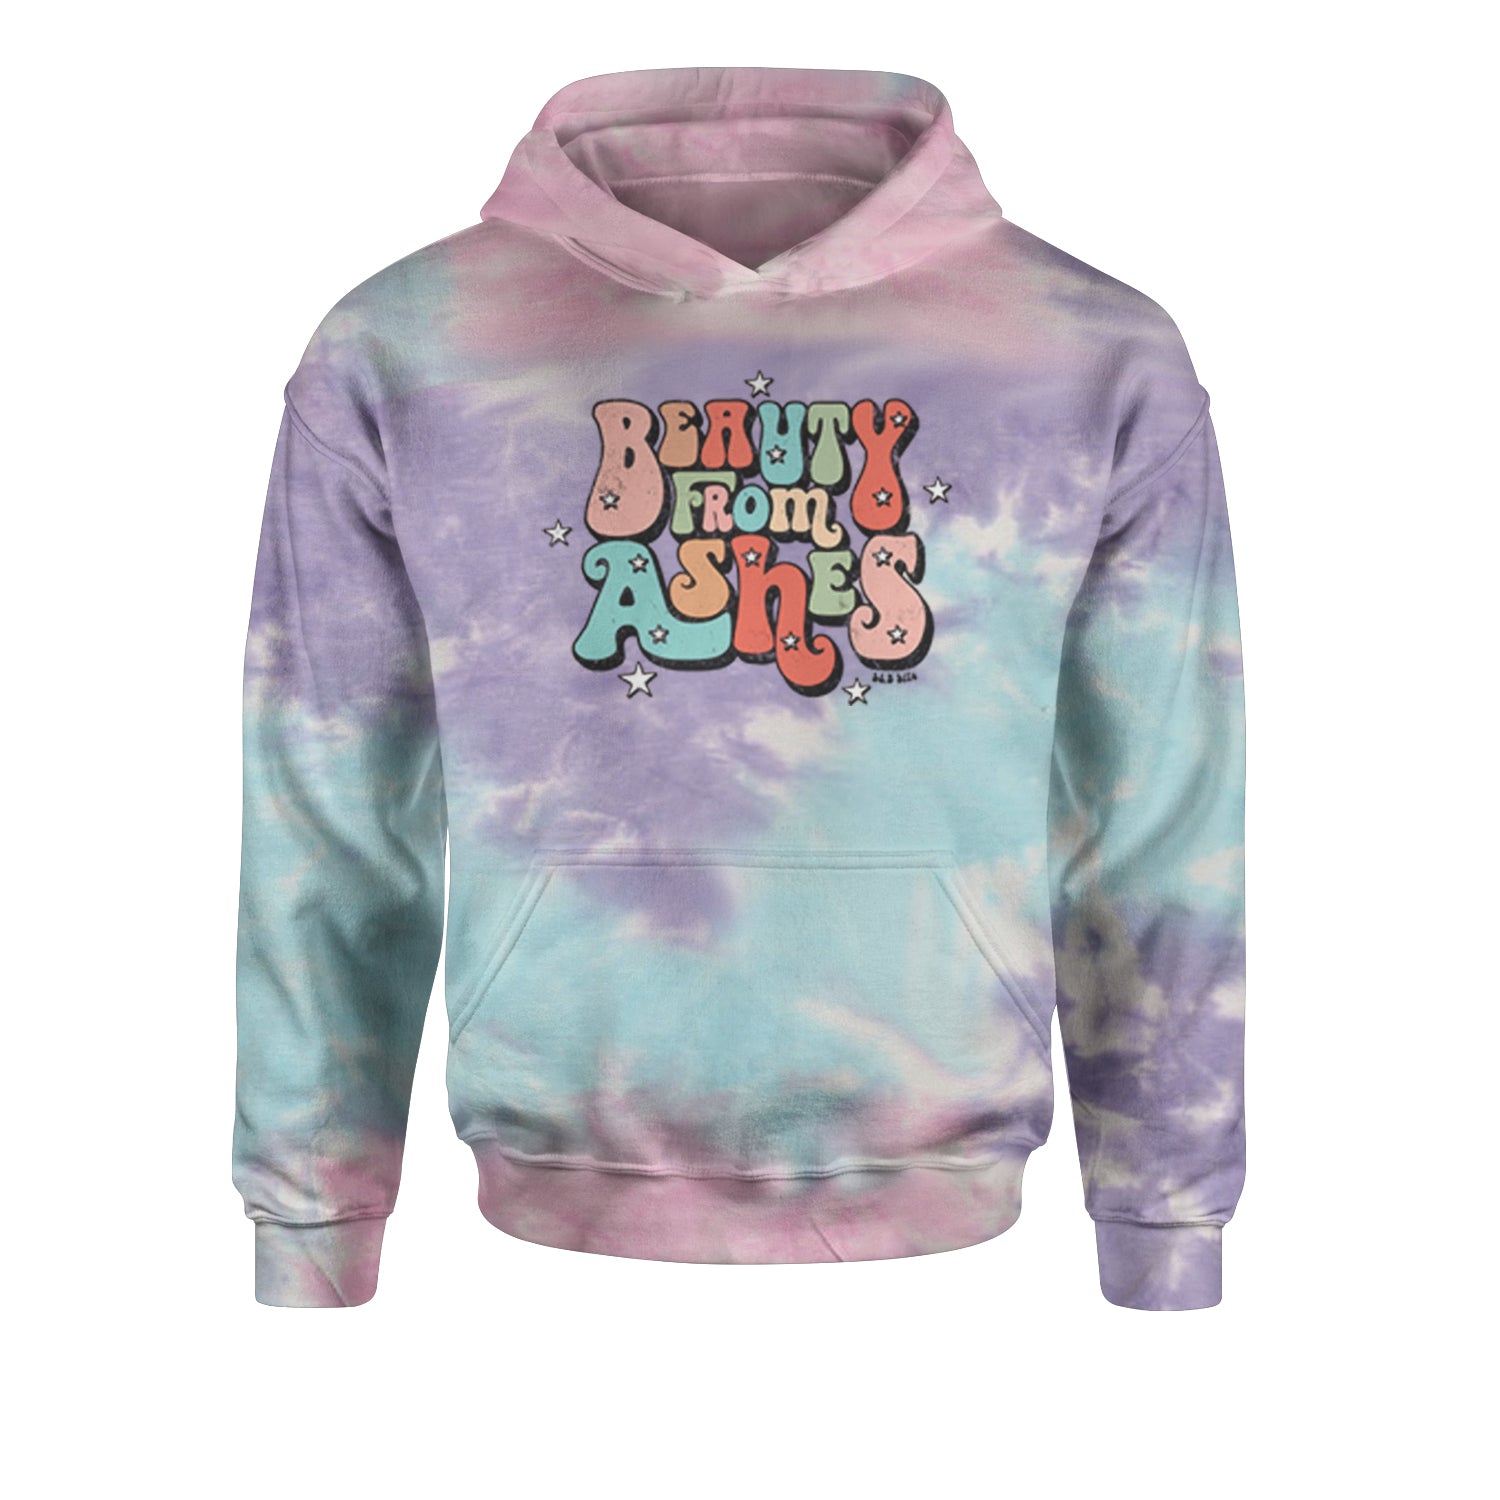 Beauty From Ashes Youth-Sized Hoodie